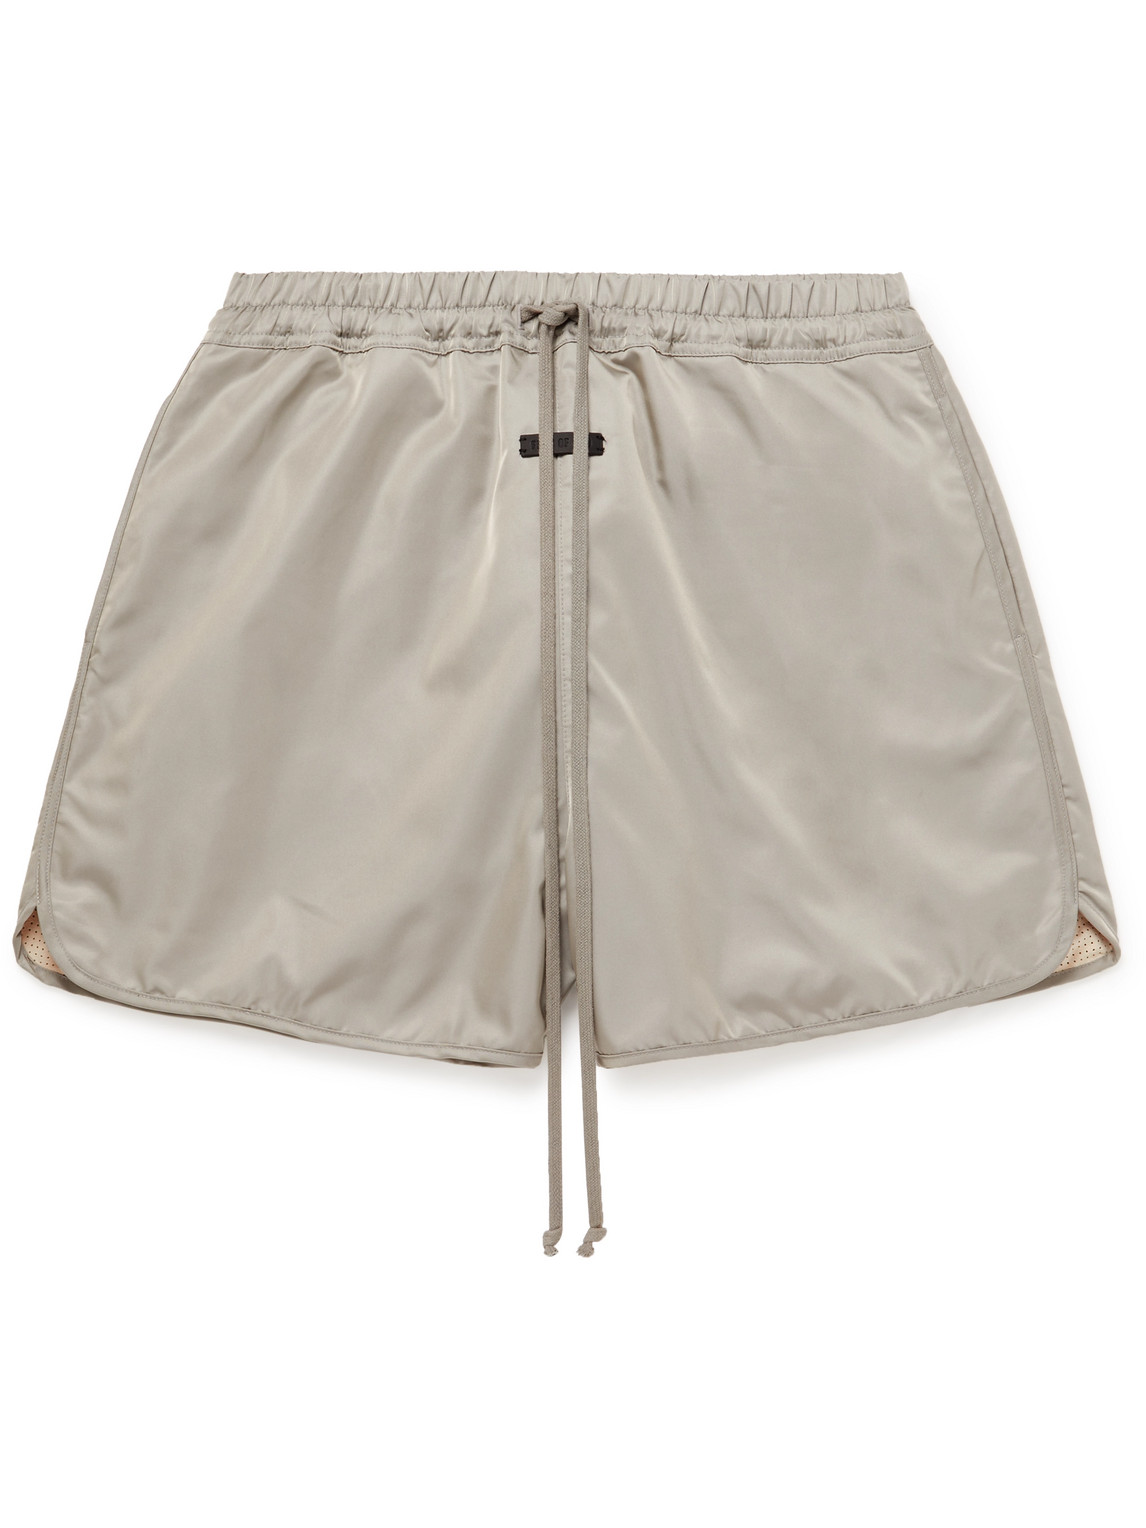 Fear Of God Iridescent Twill Shorts In Gray